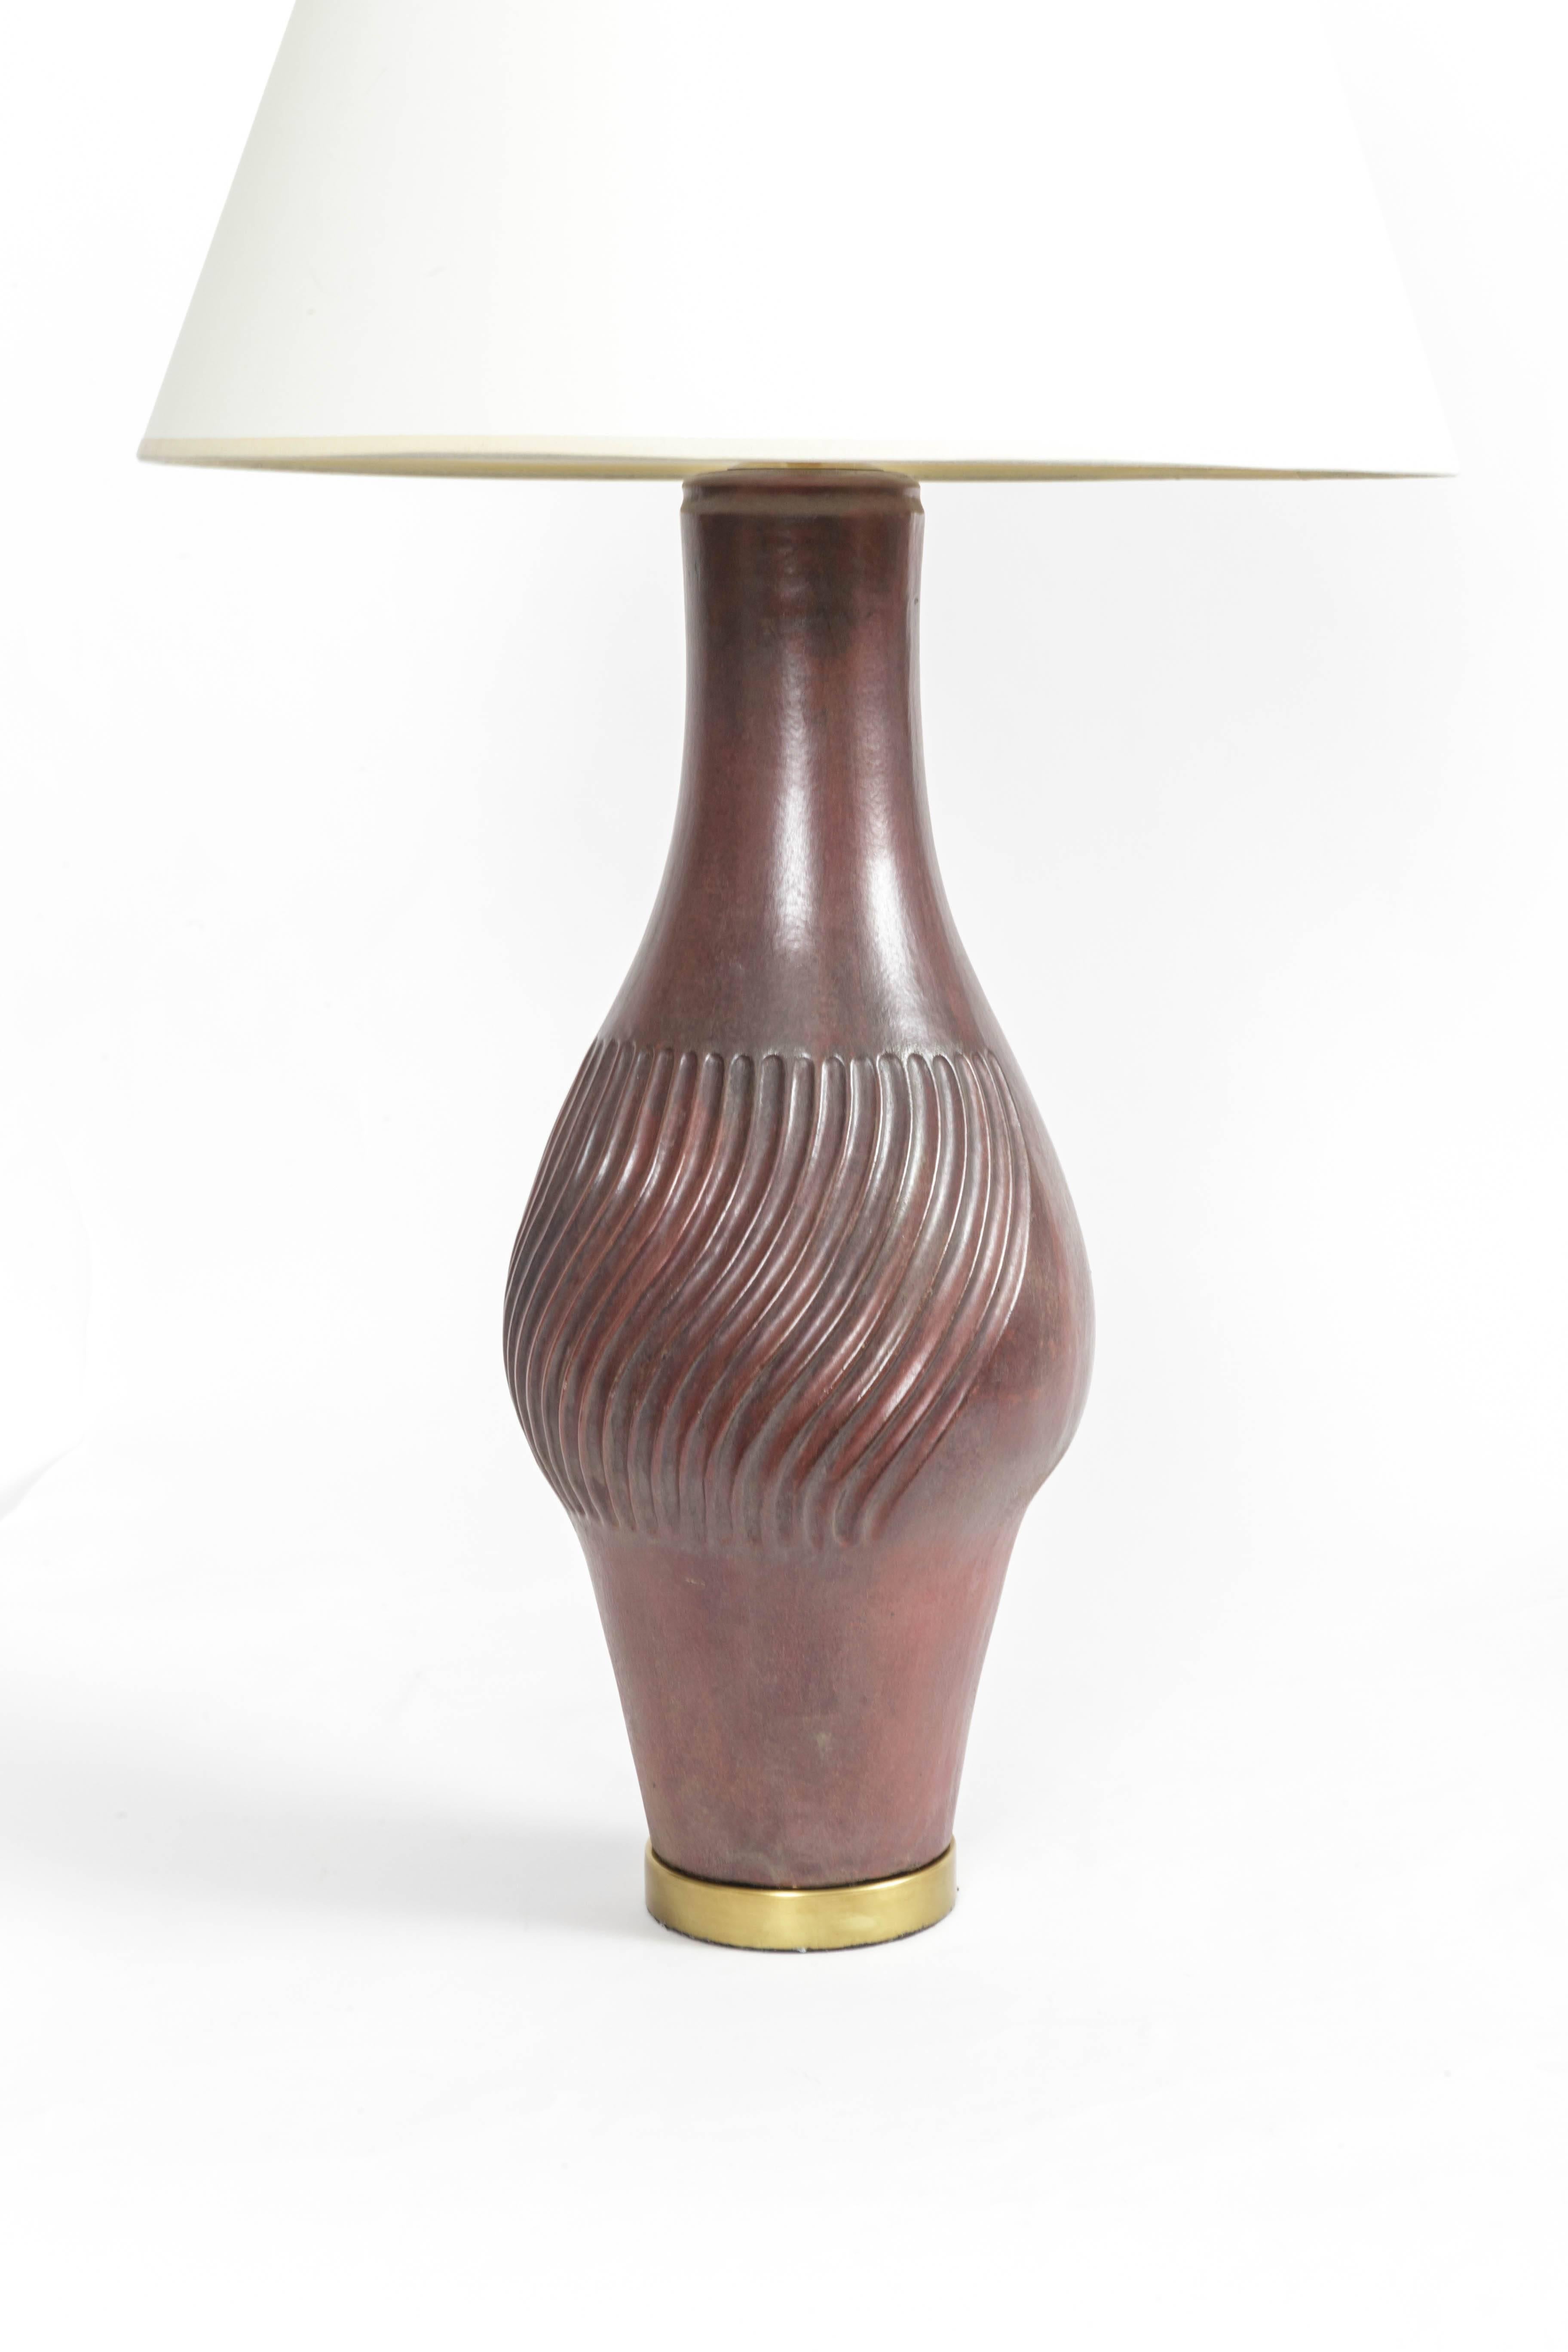 Italian Deep Red Ceramic and Brass Table Lamp by Marcello Fantoni, Italy, circa 1958